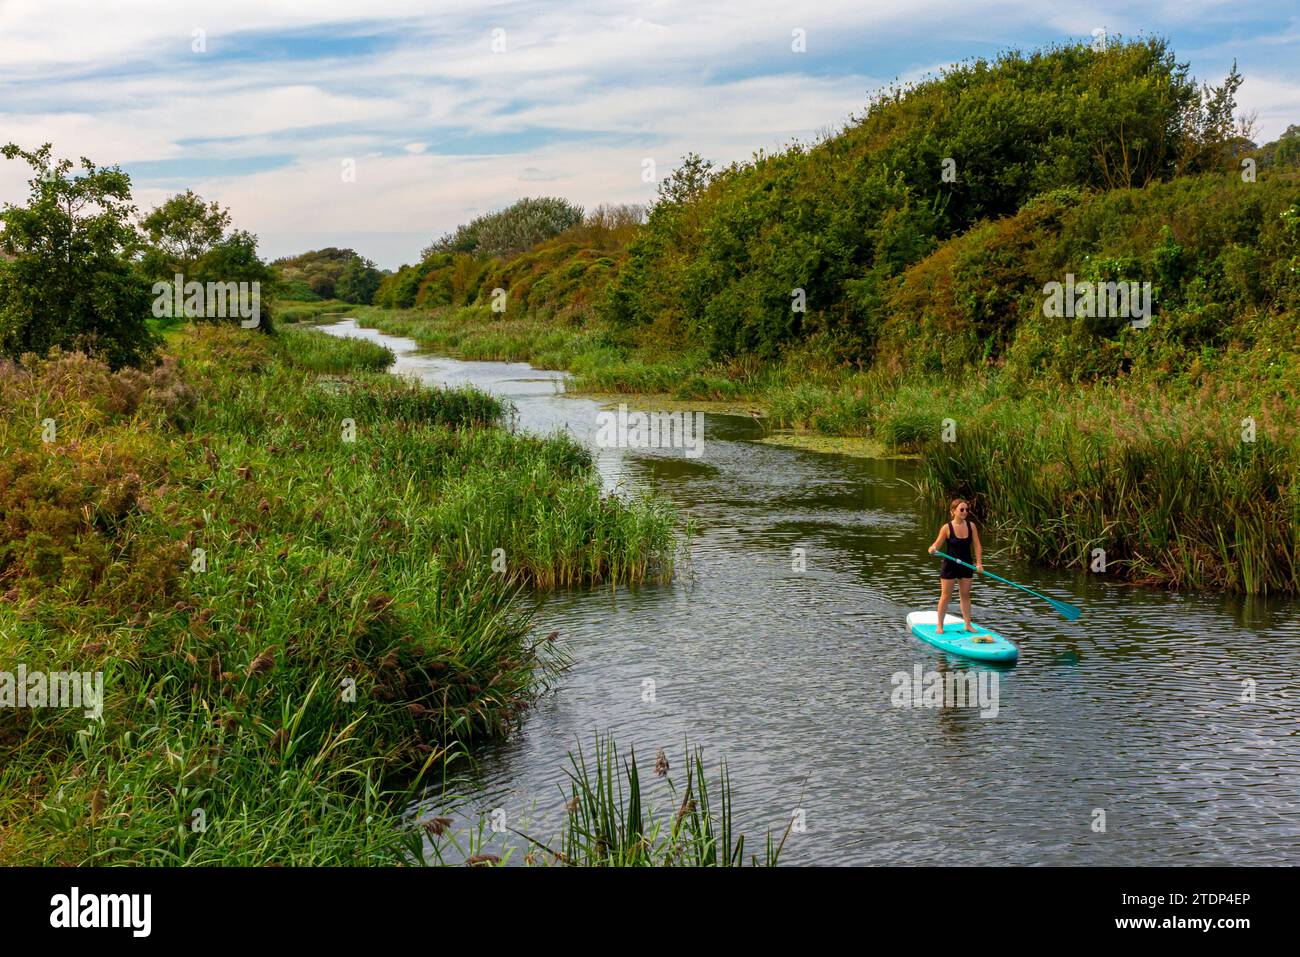 Paddle boarder on The Royal Military Canal Sandgate near Hythe in Kent England UK opened in 1809 as a defensive waterway during the Napoleonic wars. Stock Photo